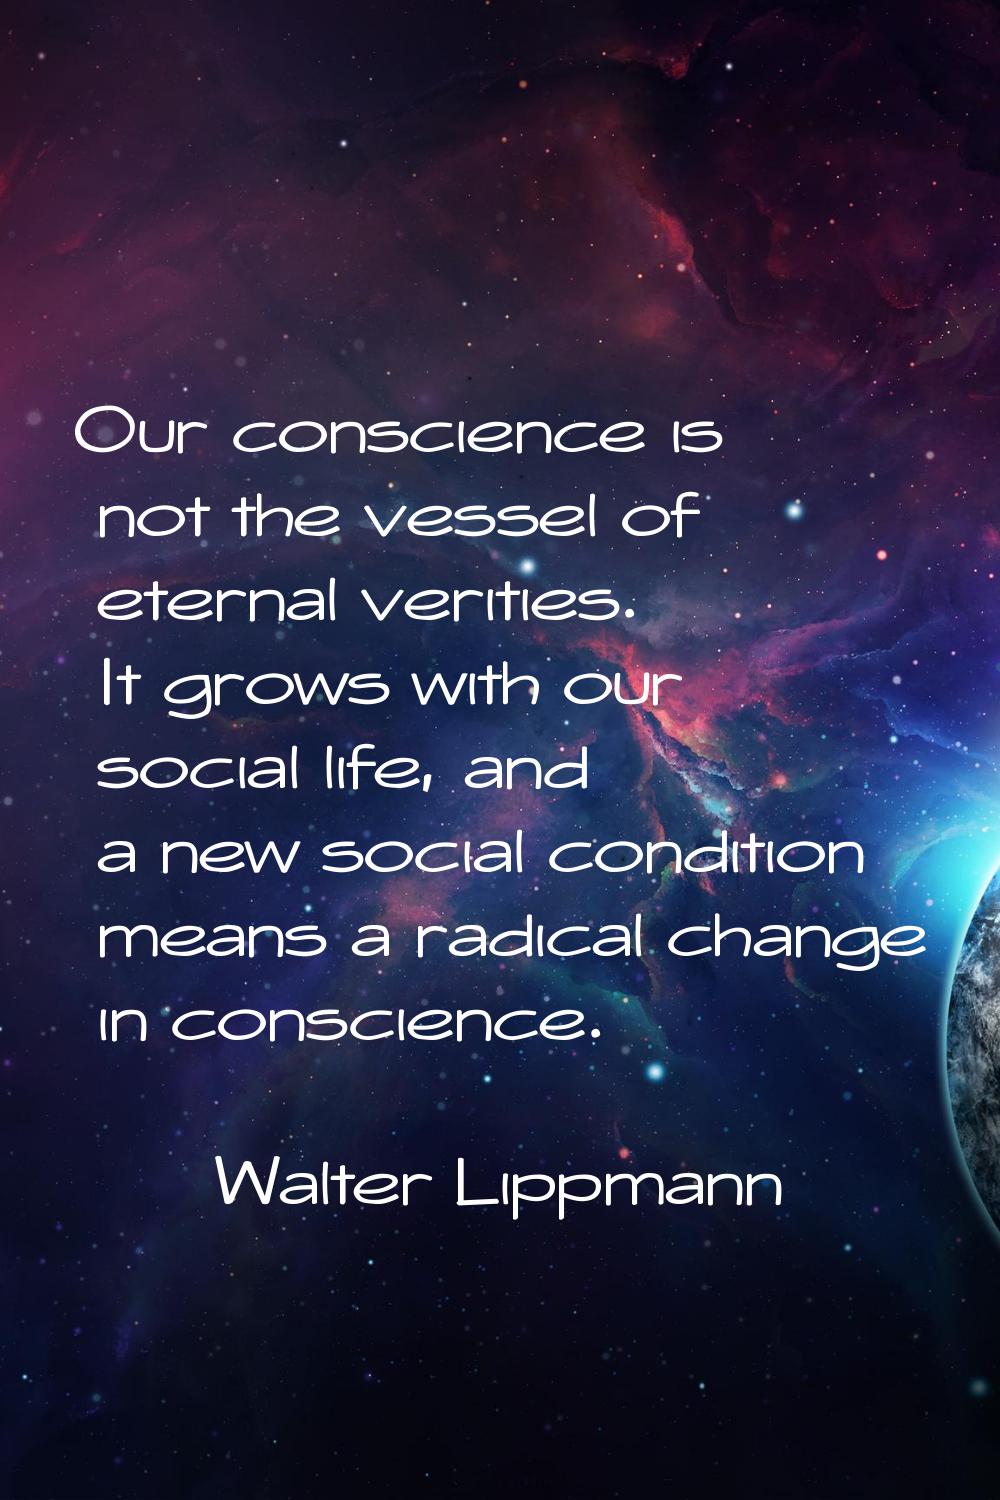 Our conscience is not the vessel of eternal verities. It grows with our social life, and a new soci